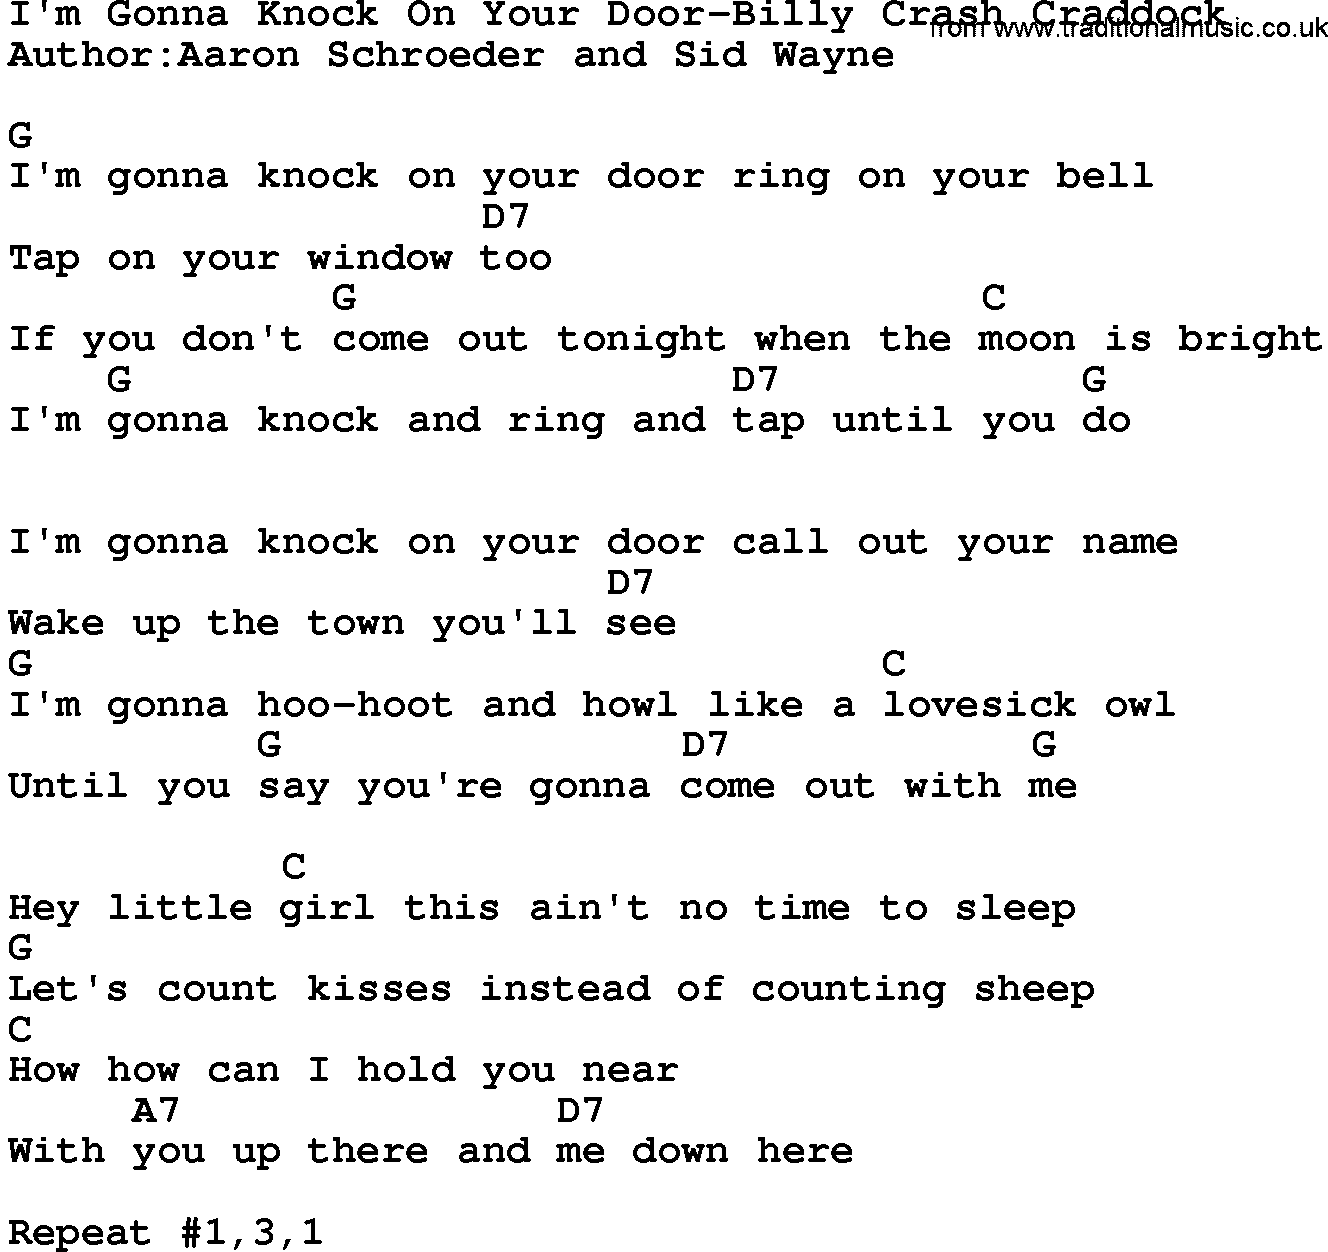 Country music song: I'm Gonna Knock On Your Door-Billy Crash Craddock lyrics and chords